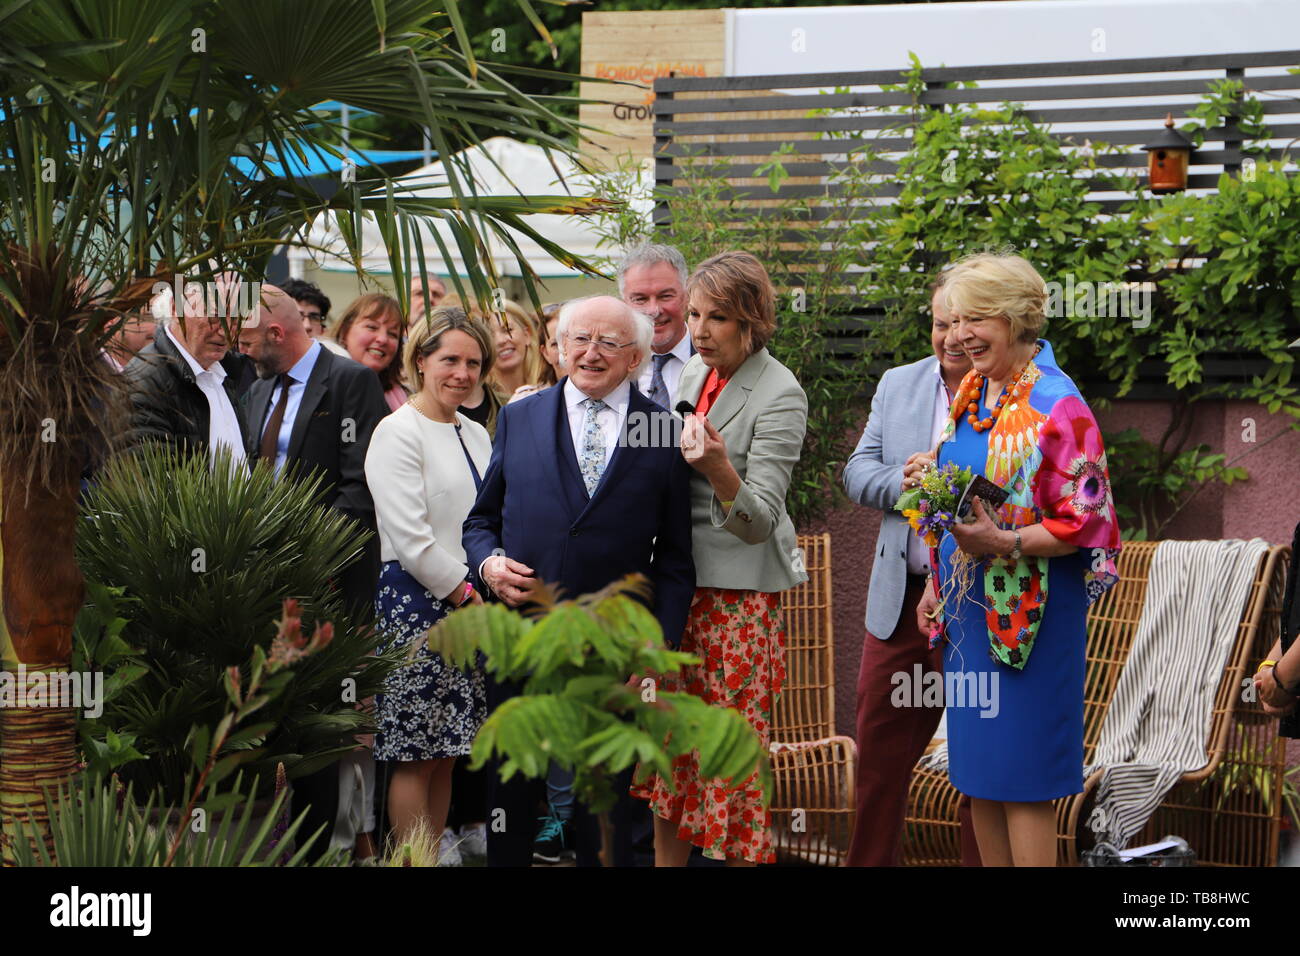 Dublin. 30th May, 2019. Irish President Michael D. Higgins (C) attends Bloom Festival in Dublin, Ireland, May 30, 2019. Bloom Festival, Ireland's largest garden festival, was officially opened to the public by Irish President Michael D. Higgins in Dublin's Phoenix Park on Thursday morning, attracting tens of thousands of visitors both from home and abroad. Credit: Xinhua/Alamy Live News Stock Photo